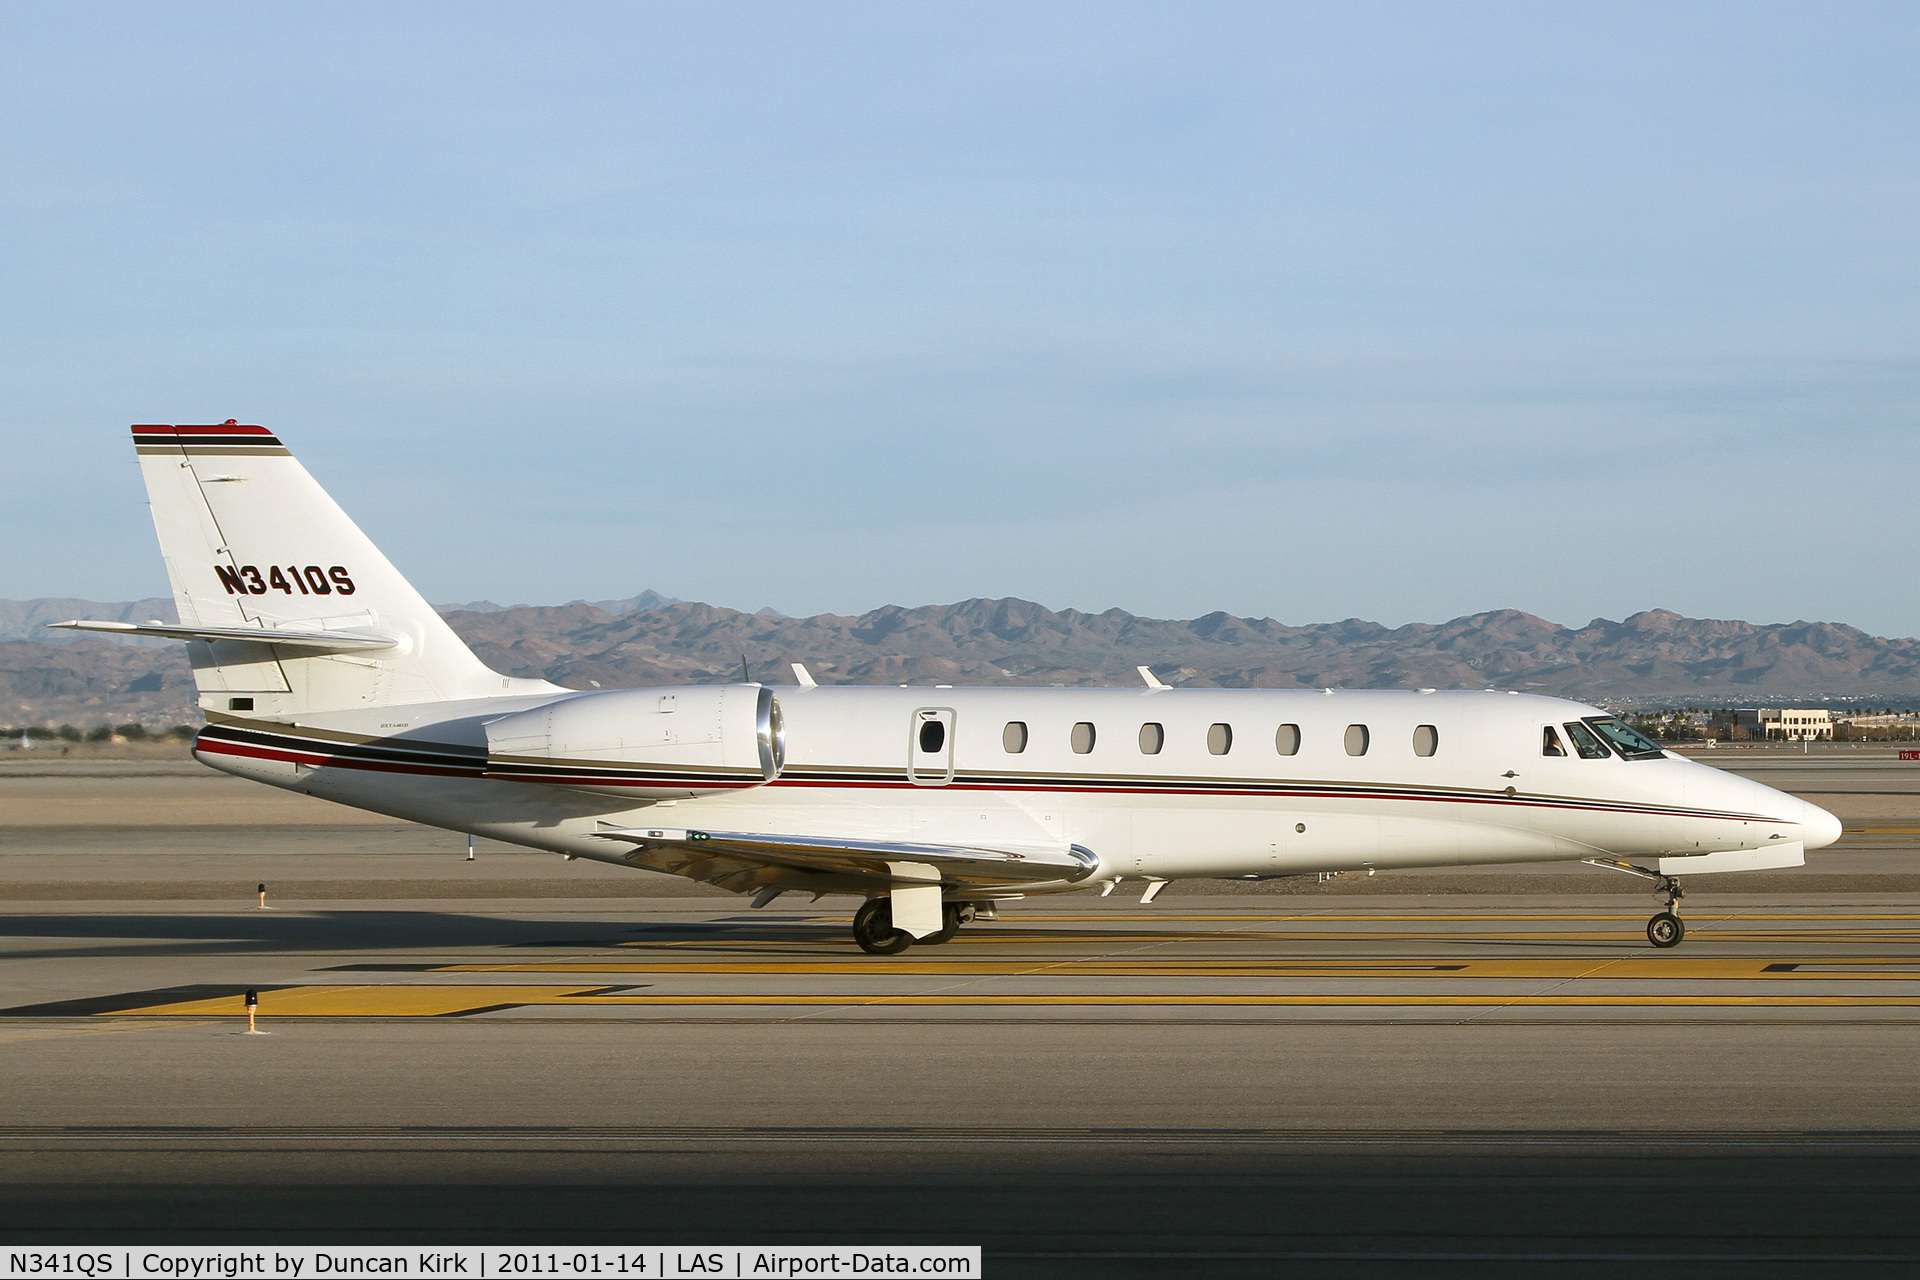 N341QS, 2008 Cessna 680 Citation Sovereign C/N 680-0225, A stonker of a plane!